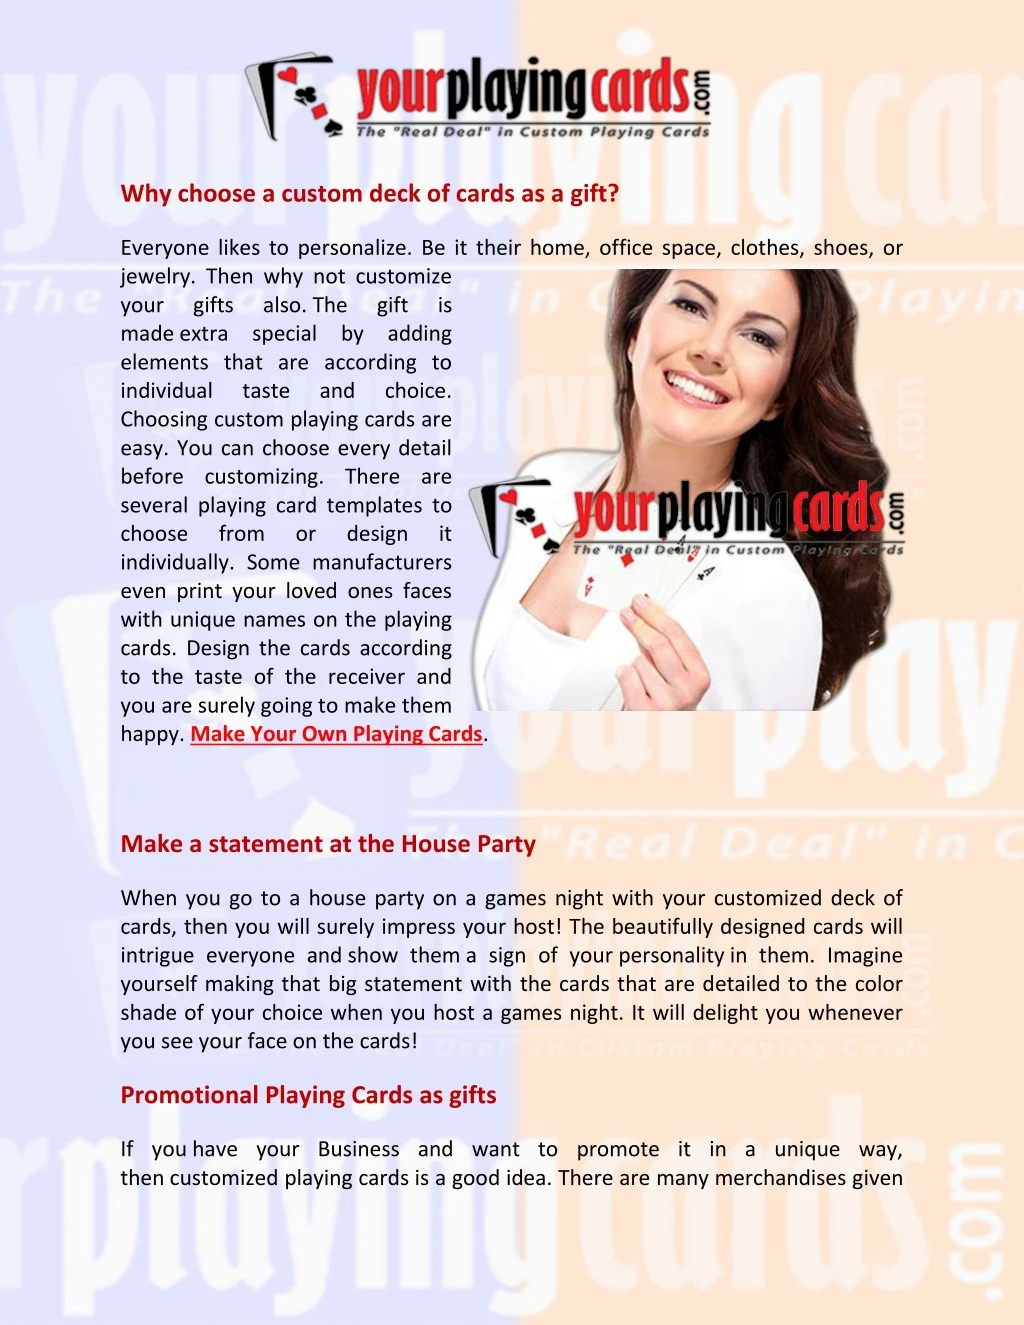 why choose a custom deck of cards as a gift